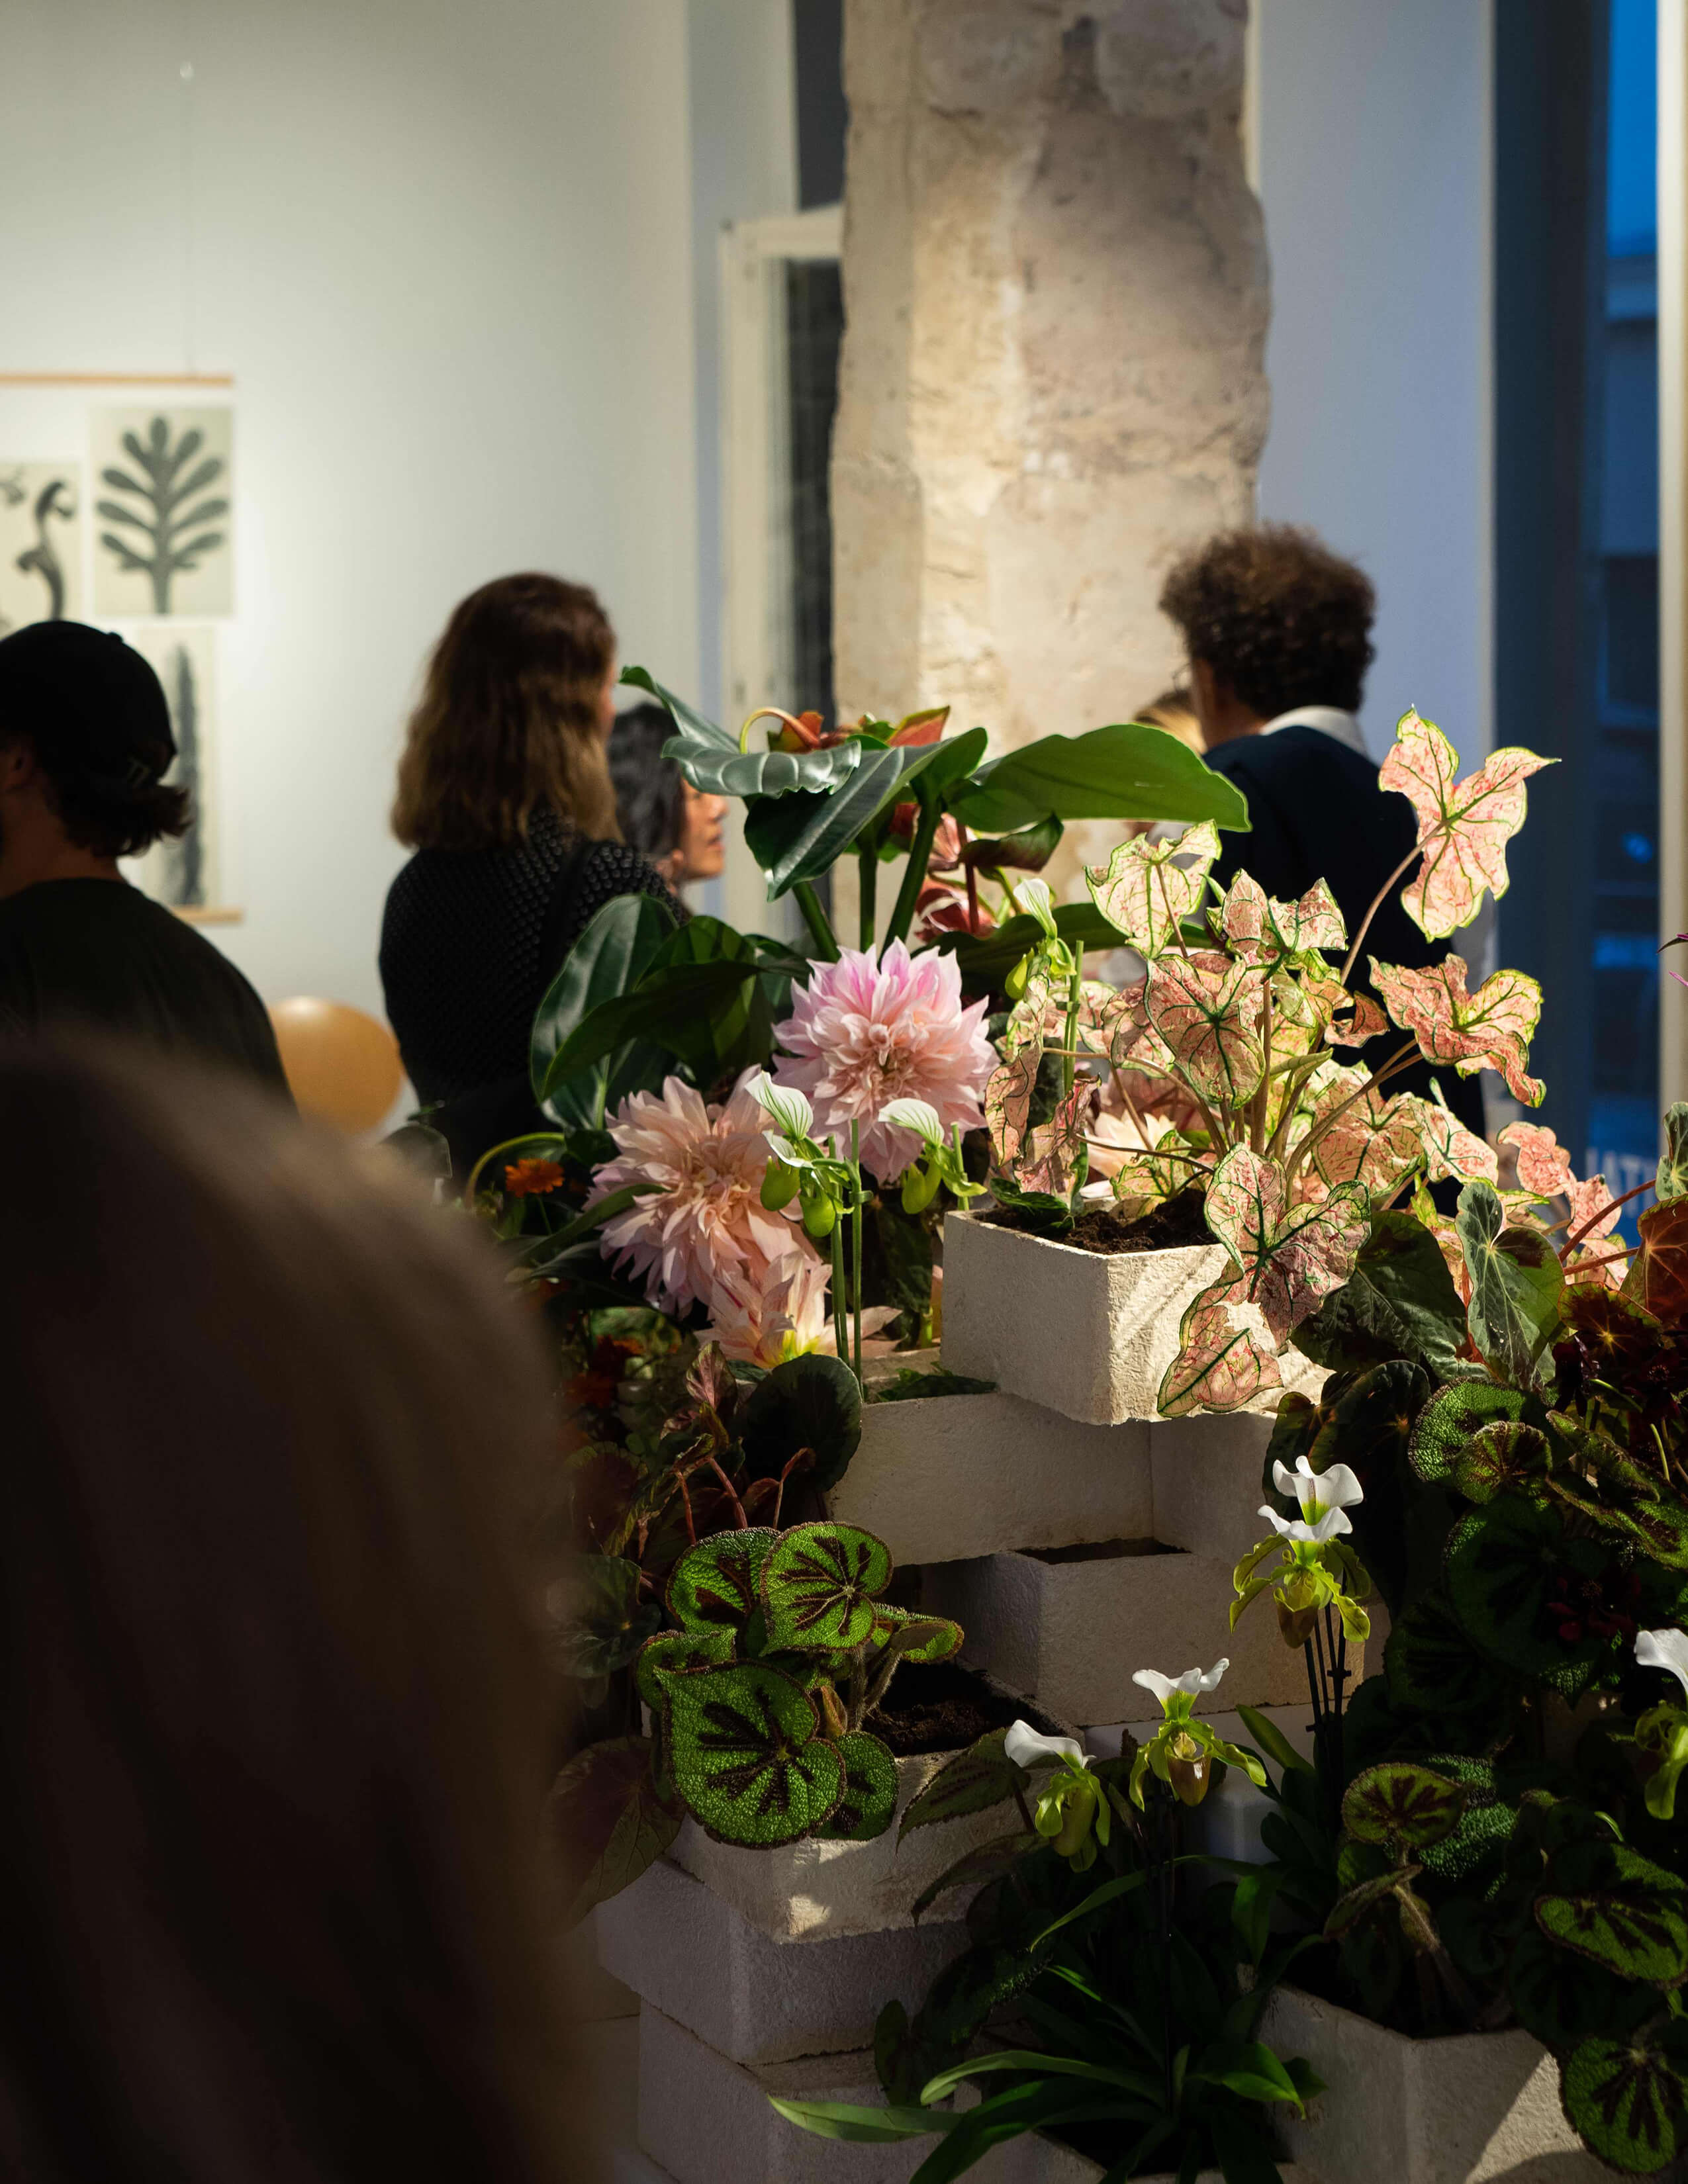 A collection of different plants and flowers, including Calladiums, Paphiopedilum spicerianums, Begonia massoniana ‘Rock’, and Dahlia Café au Lait in multiple white boxes while there are some people in the background.